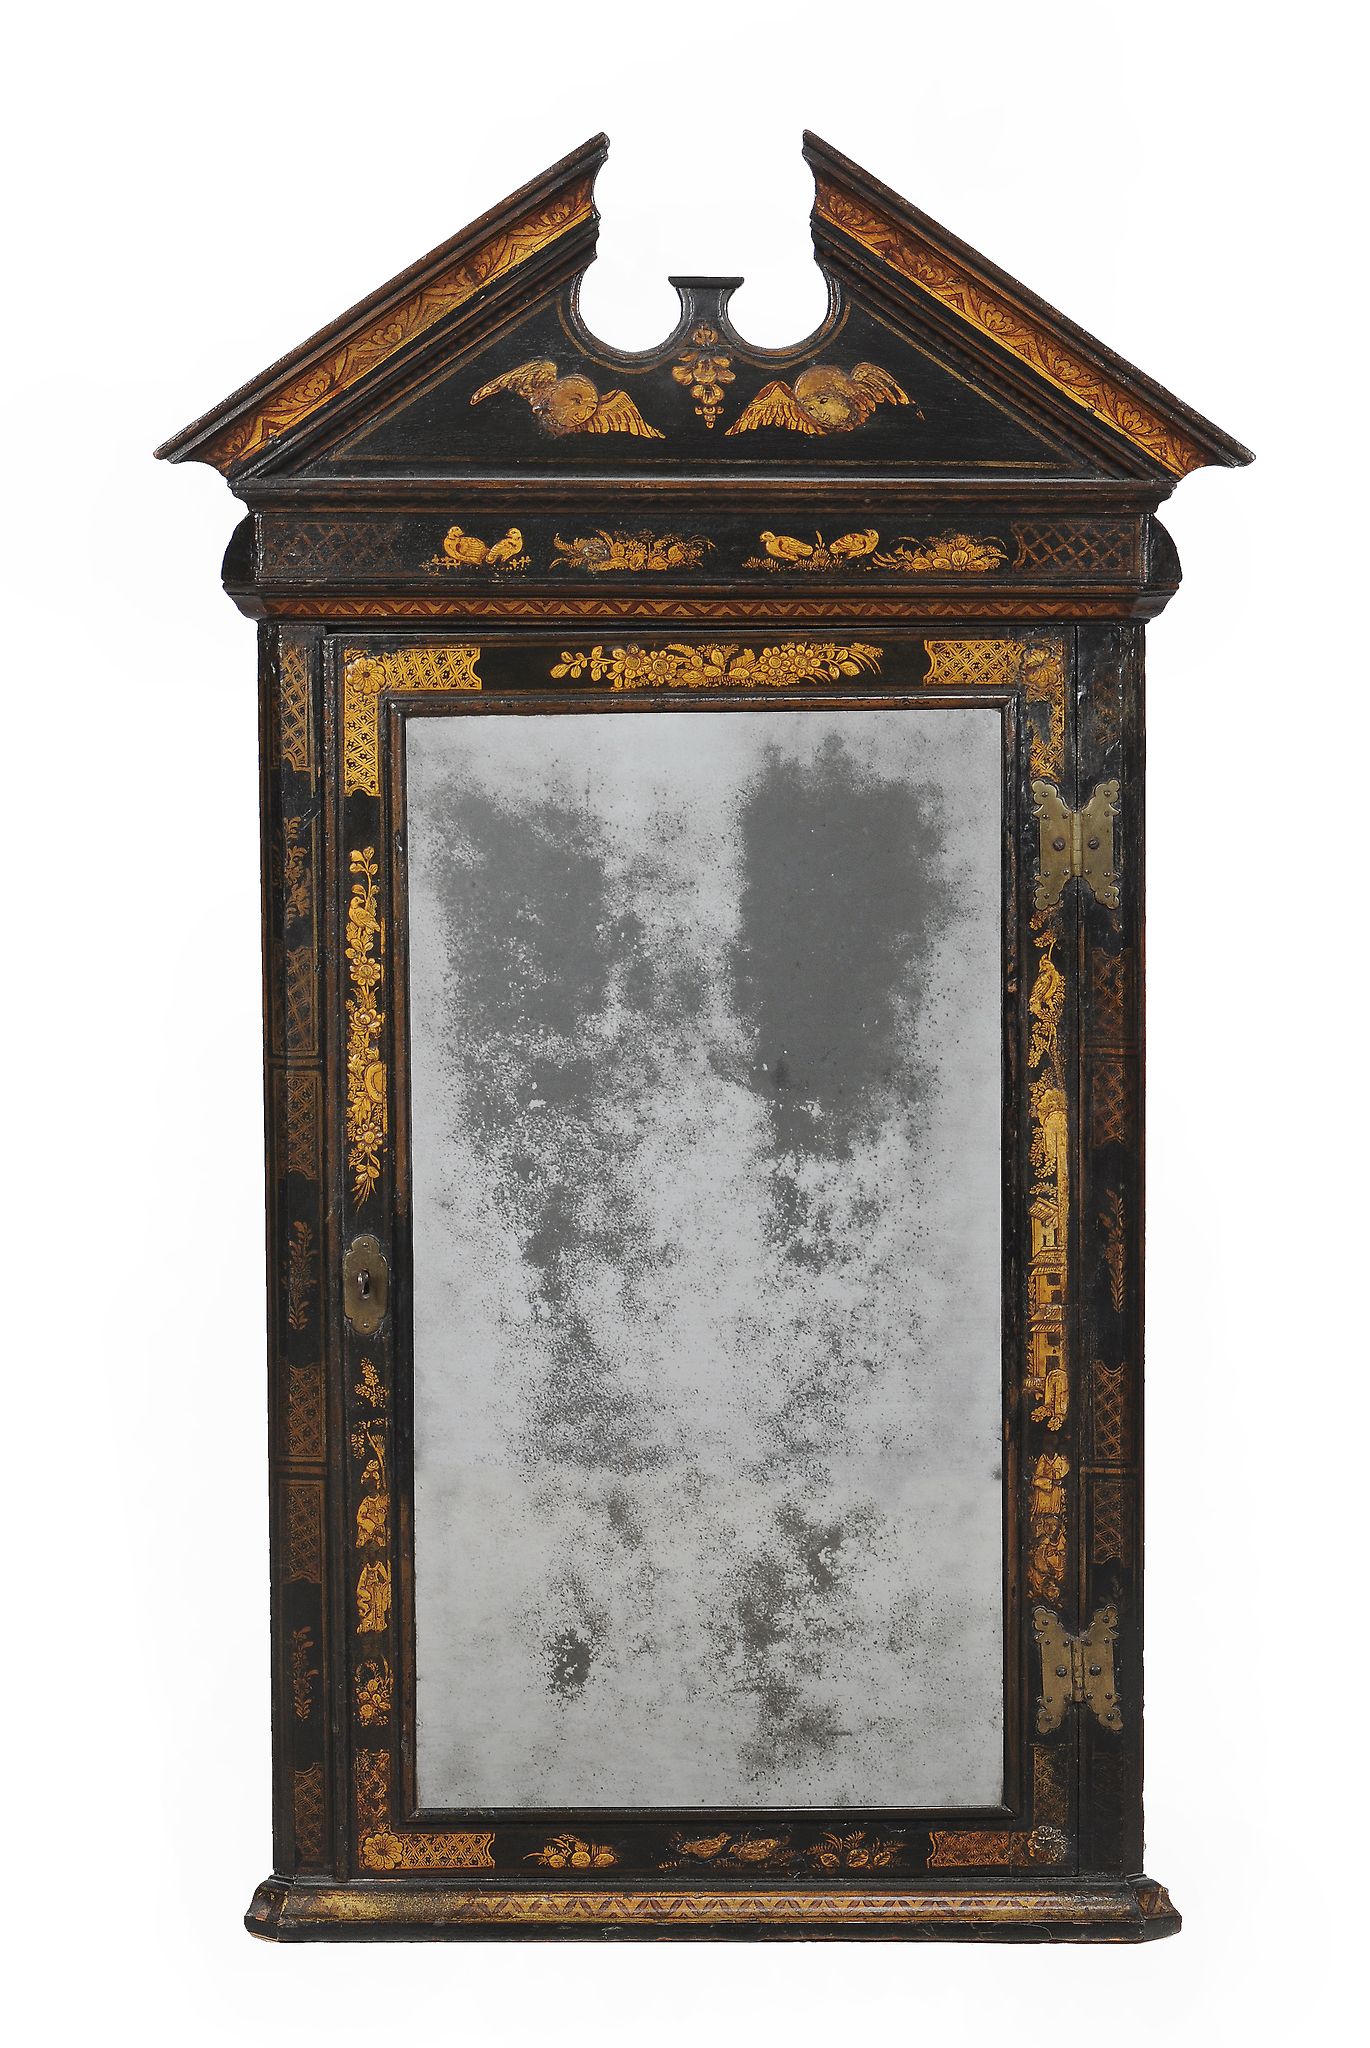 A George I black lacquer and gilt decorated hanging corner cabinet, circa 1720, in the manner of